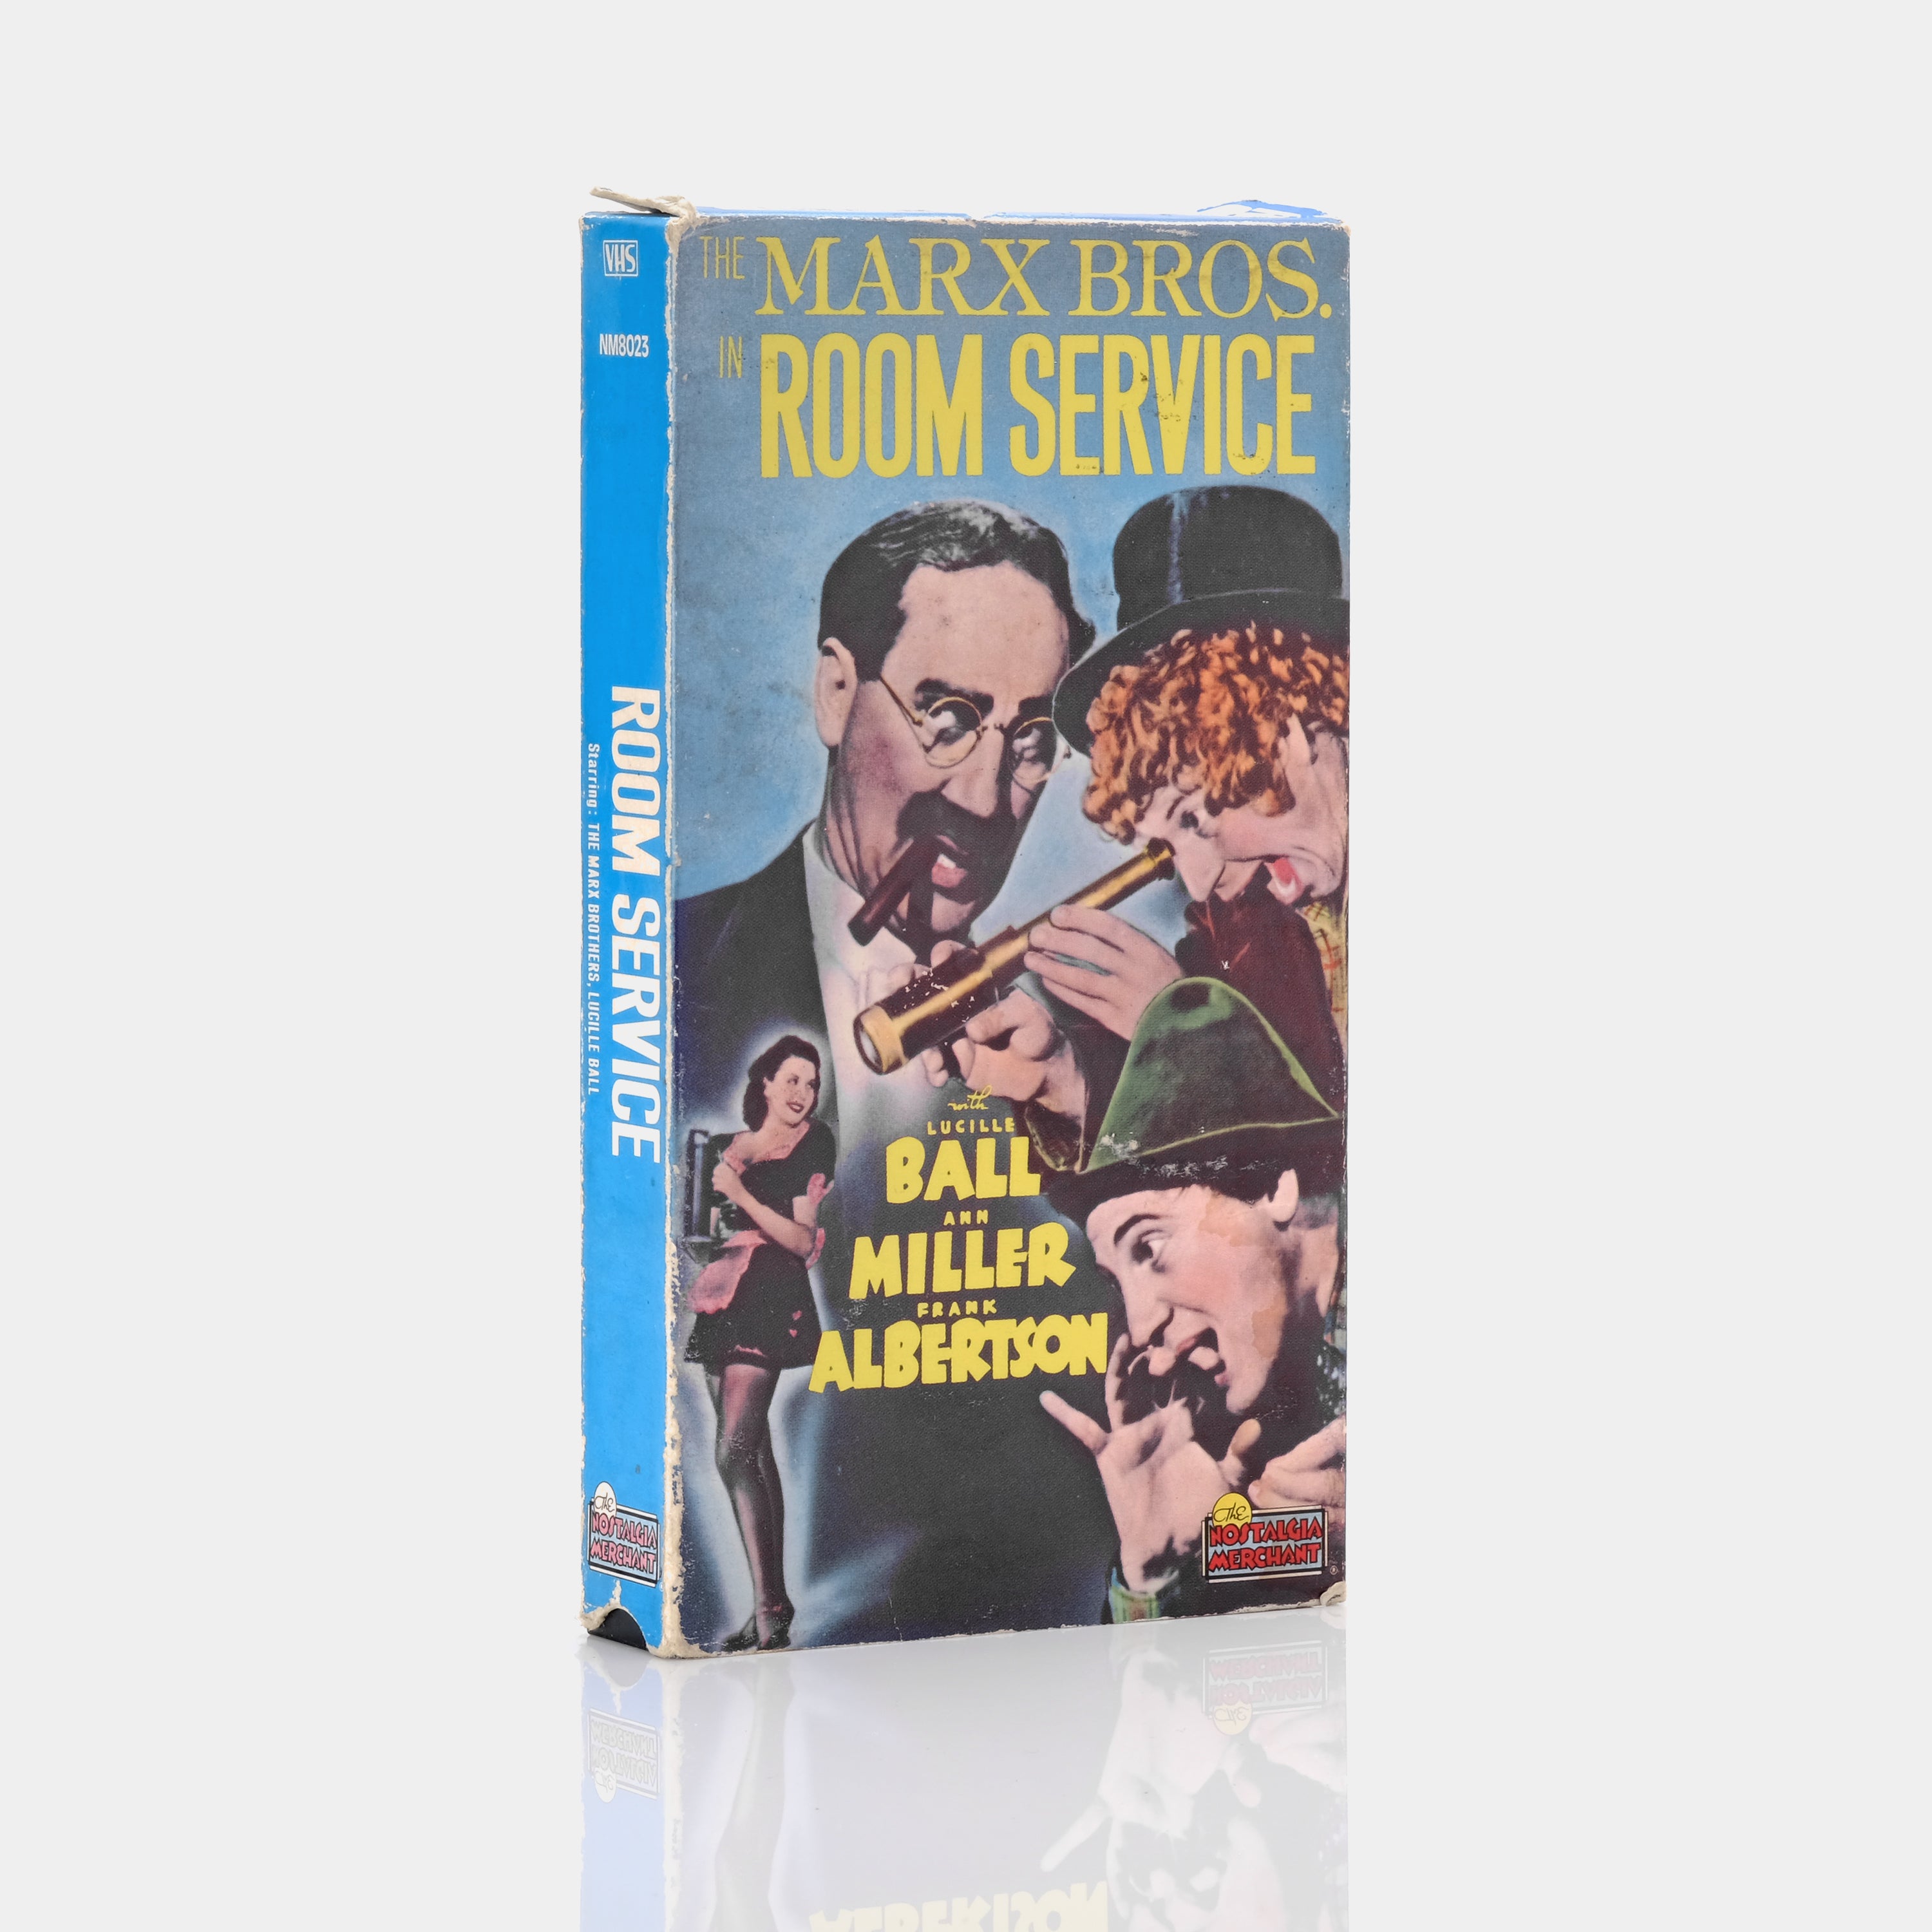 Room Service VHS Tape